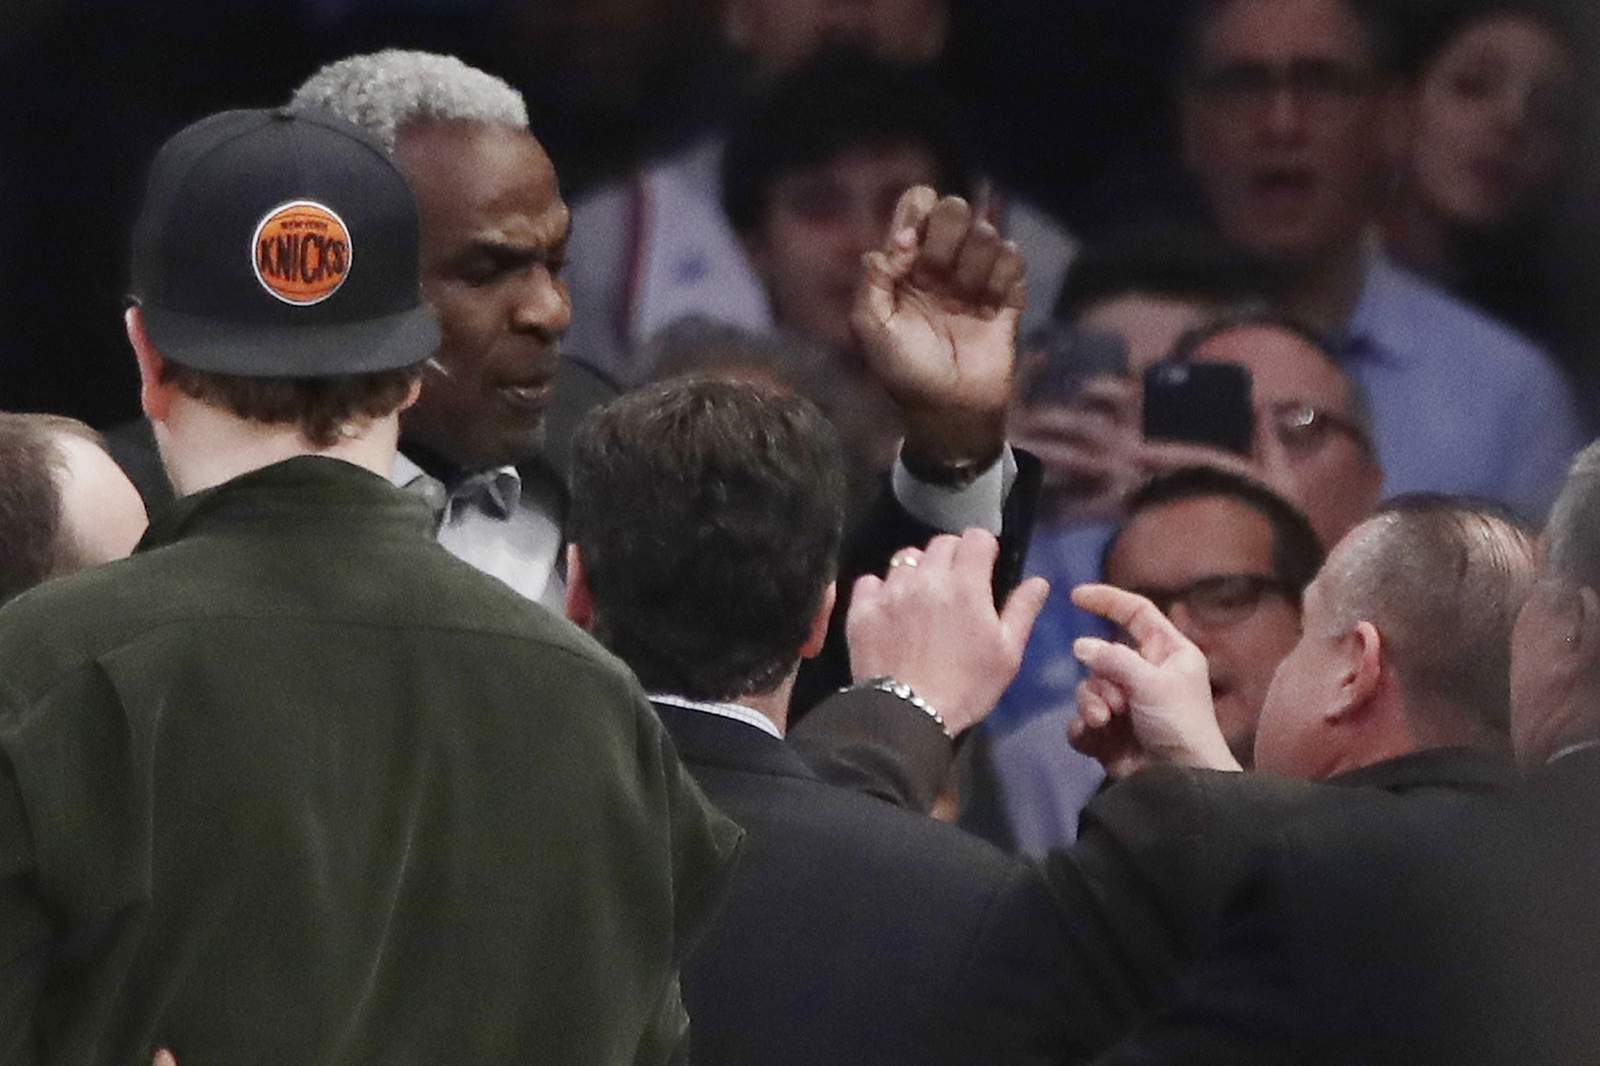 Raptors sued by Knicks, accused of using ex-employee as 'mole' to steal  scouting secrets